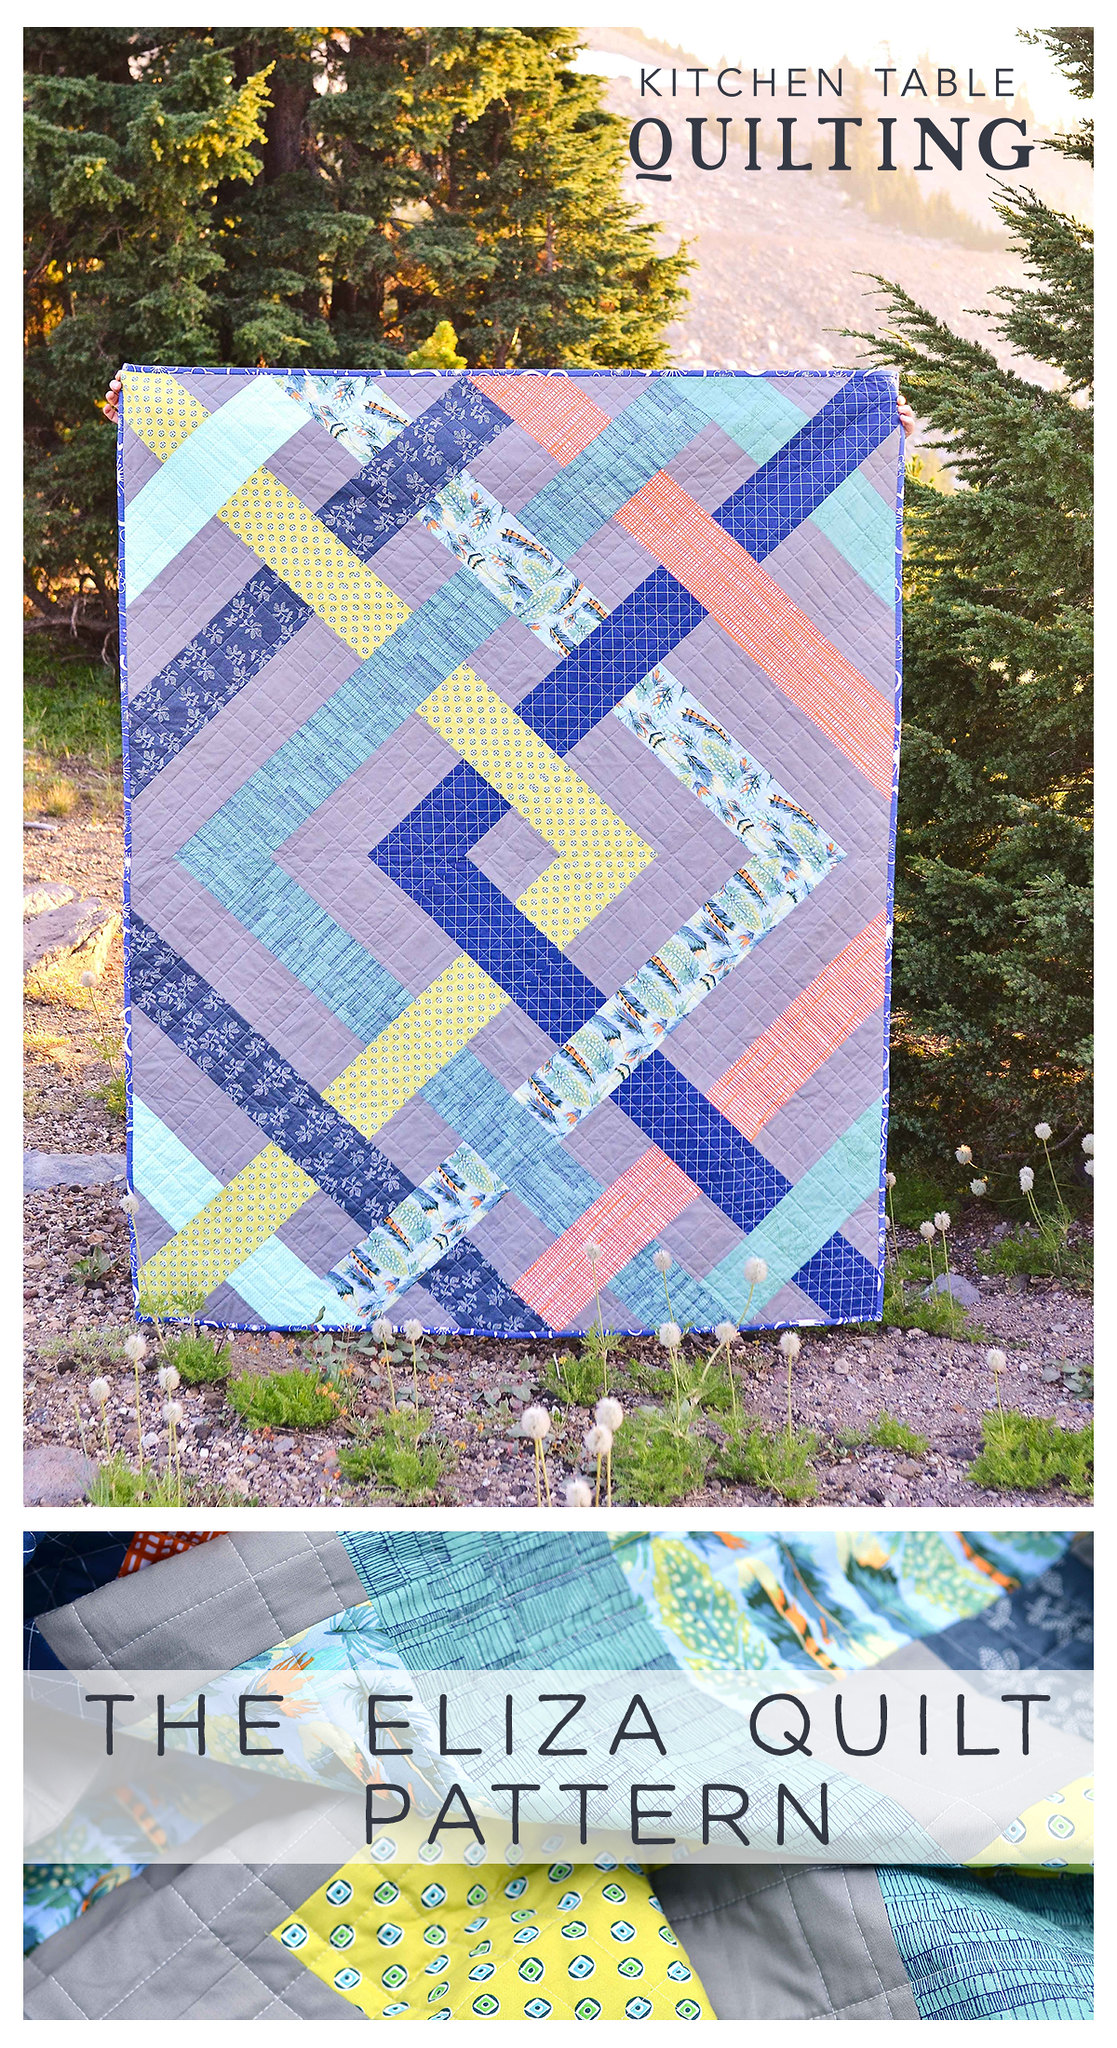 The Eliza Quilt Pattern - Kitchen Table Quilting